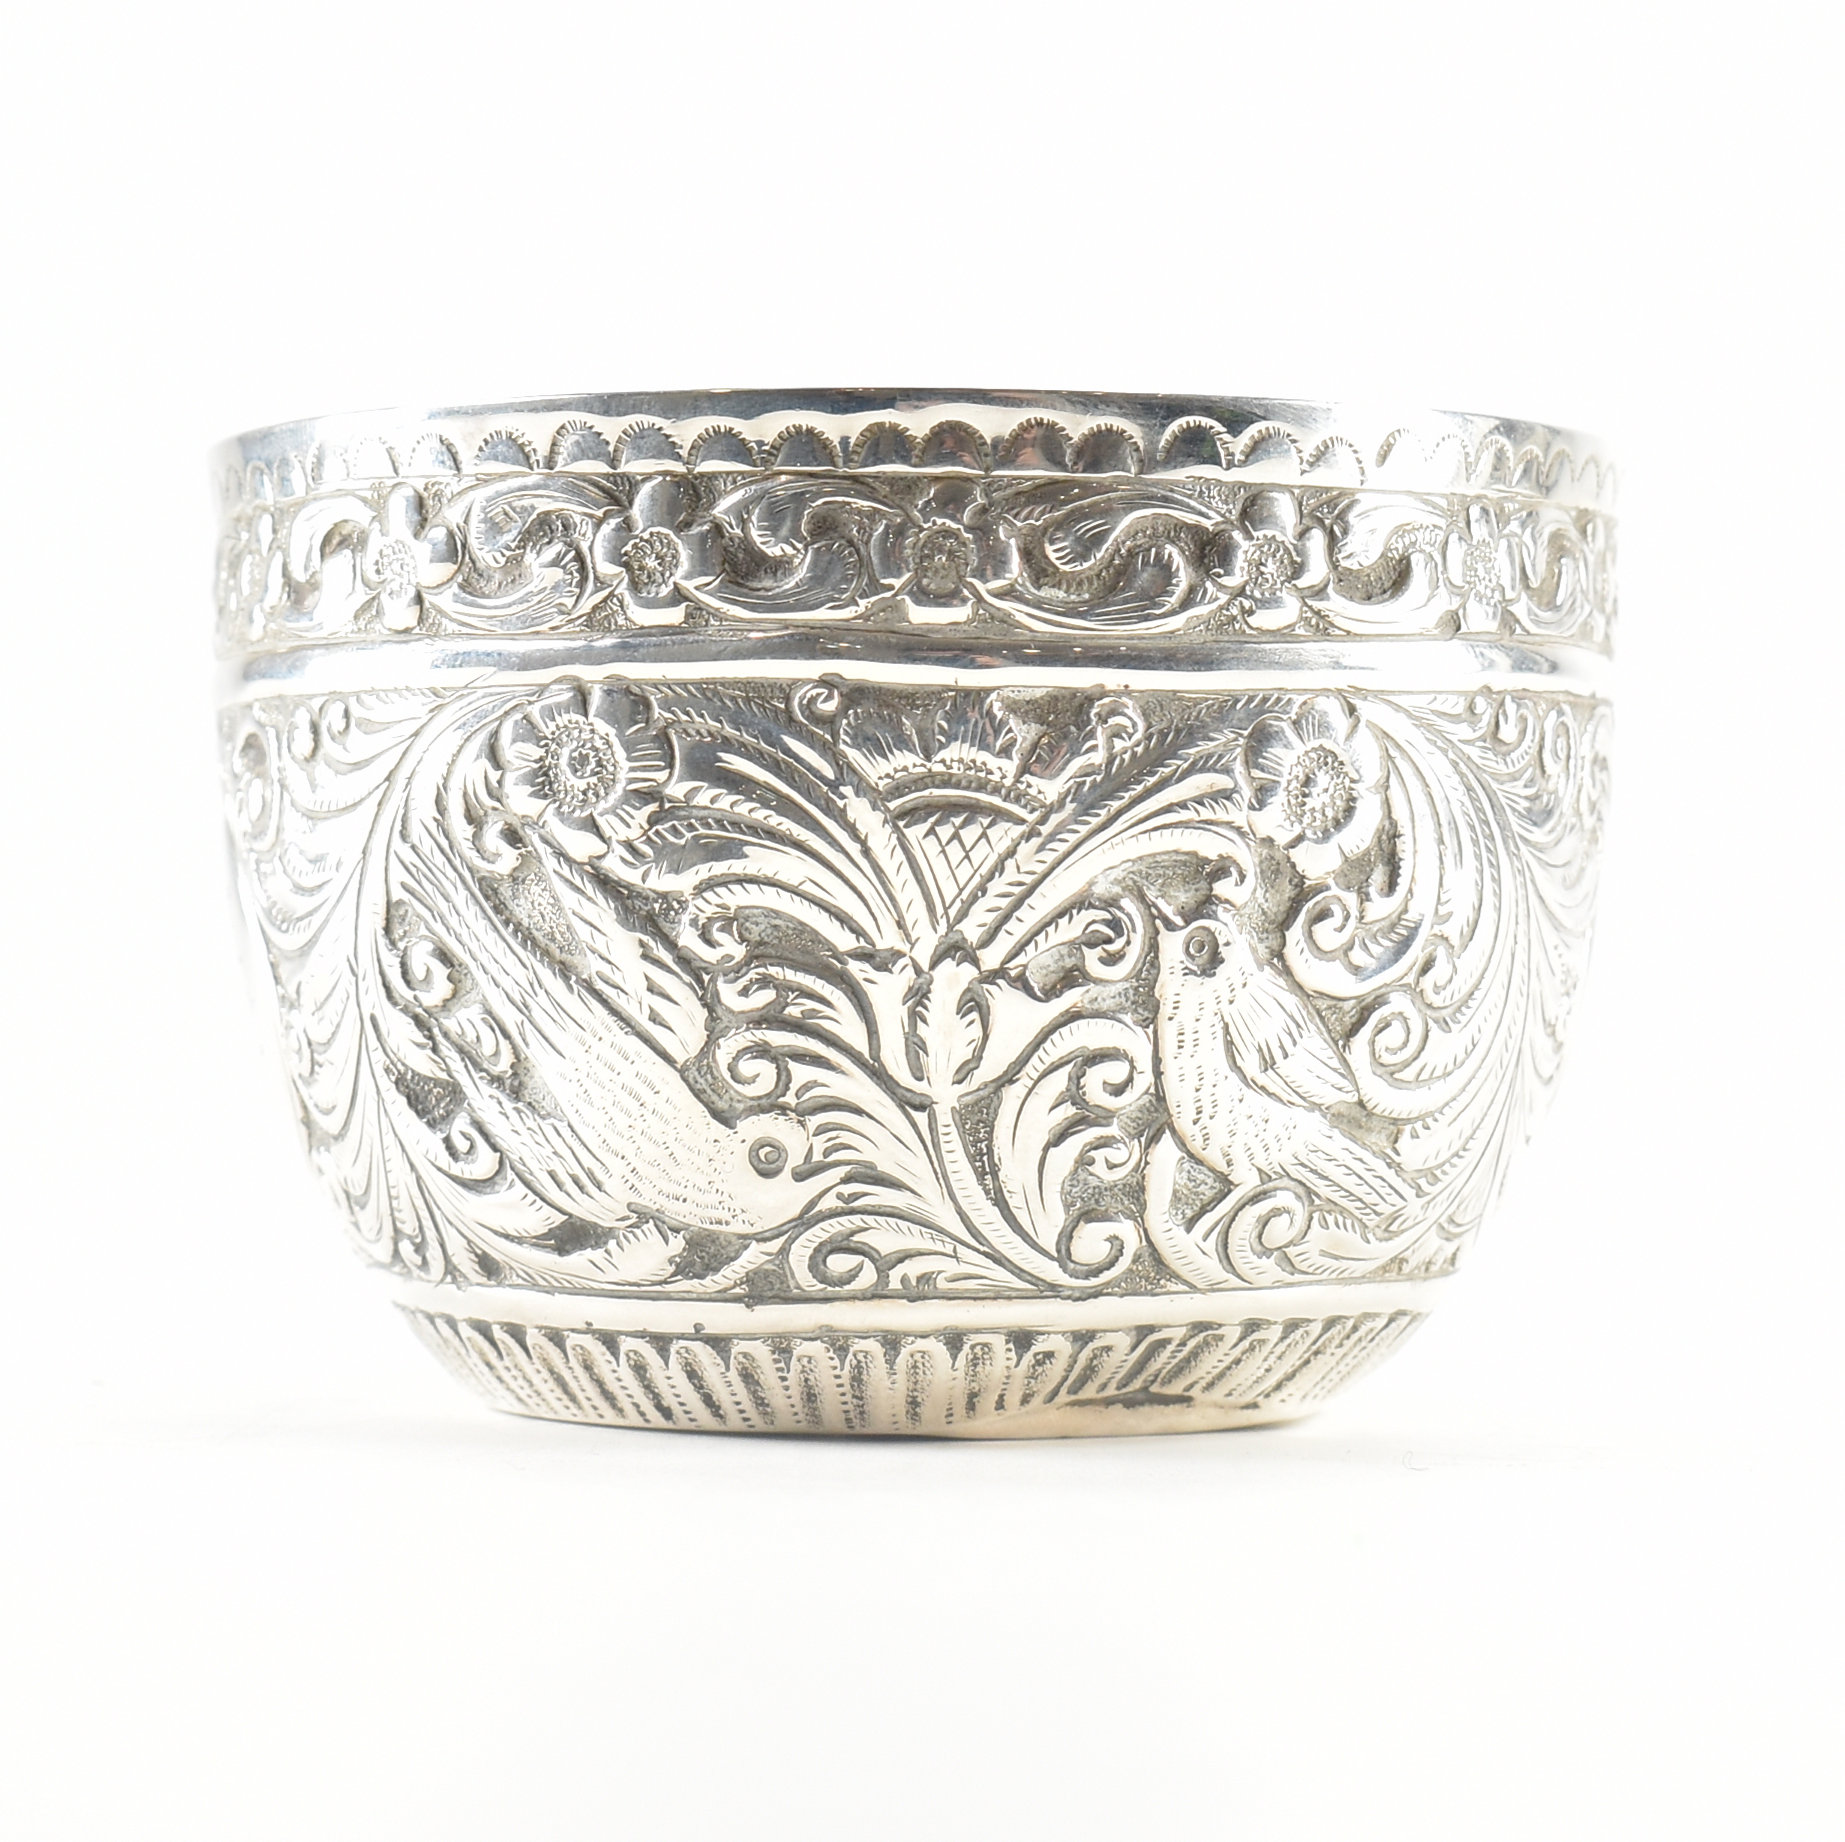 VICTORIAN HALLMARKED SILVER REPOUSSÉ BOWL - Image 5 of 7